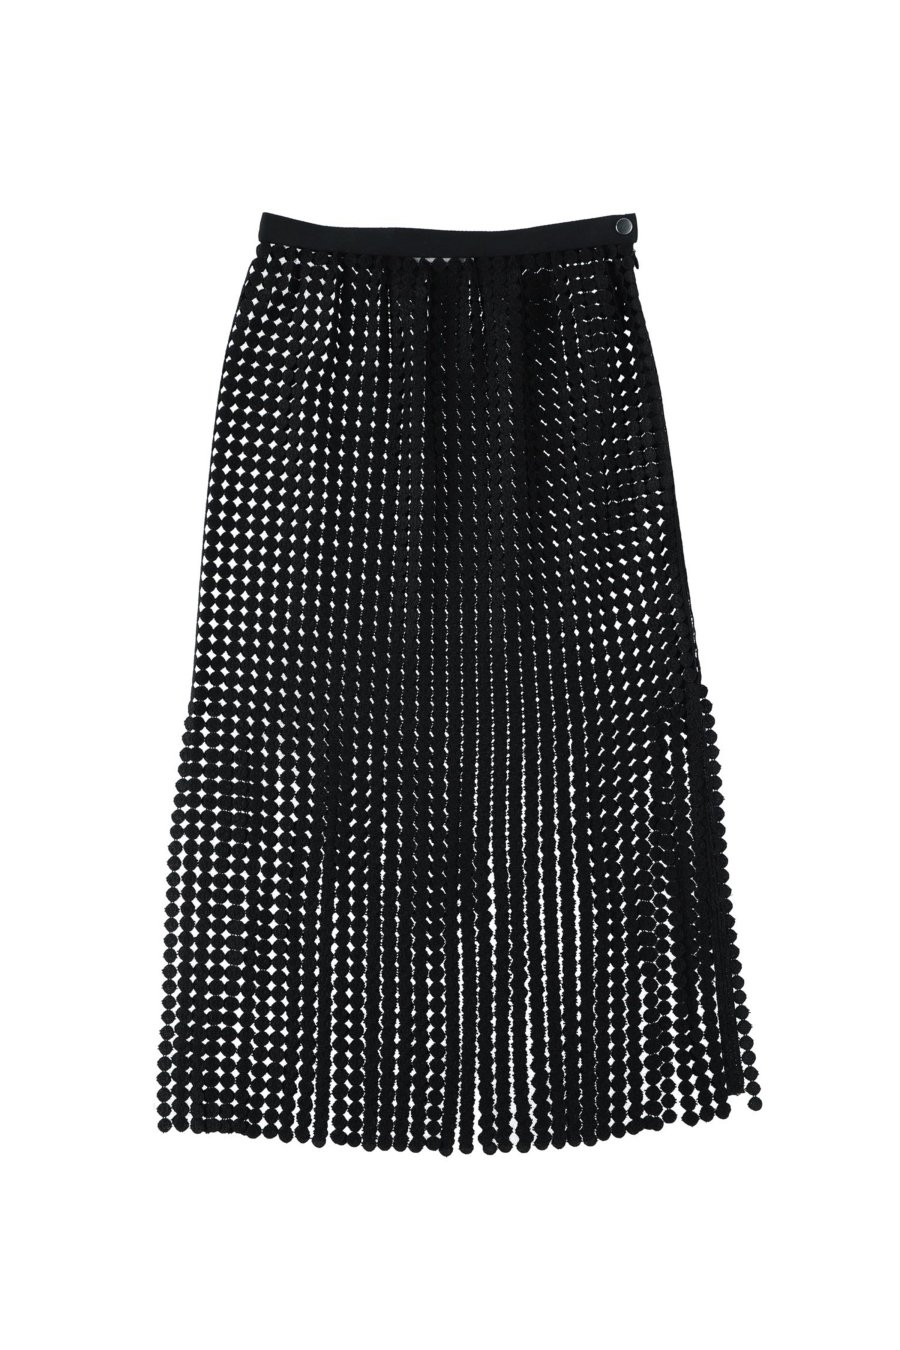 BELPER  22AW DOT LACE SKIRT<img class='new_mark_img2' src='https://img.shop-pro.jp/img/new/icons15.gif' style='border:none;display:inline;margin:0px;padding:0px;width:auto;' />